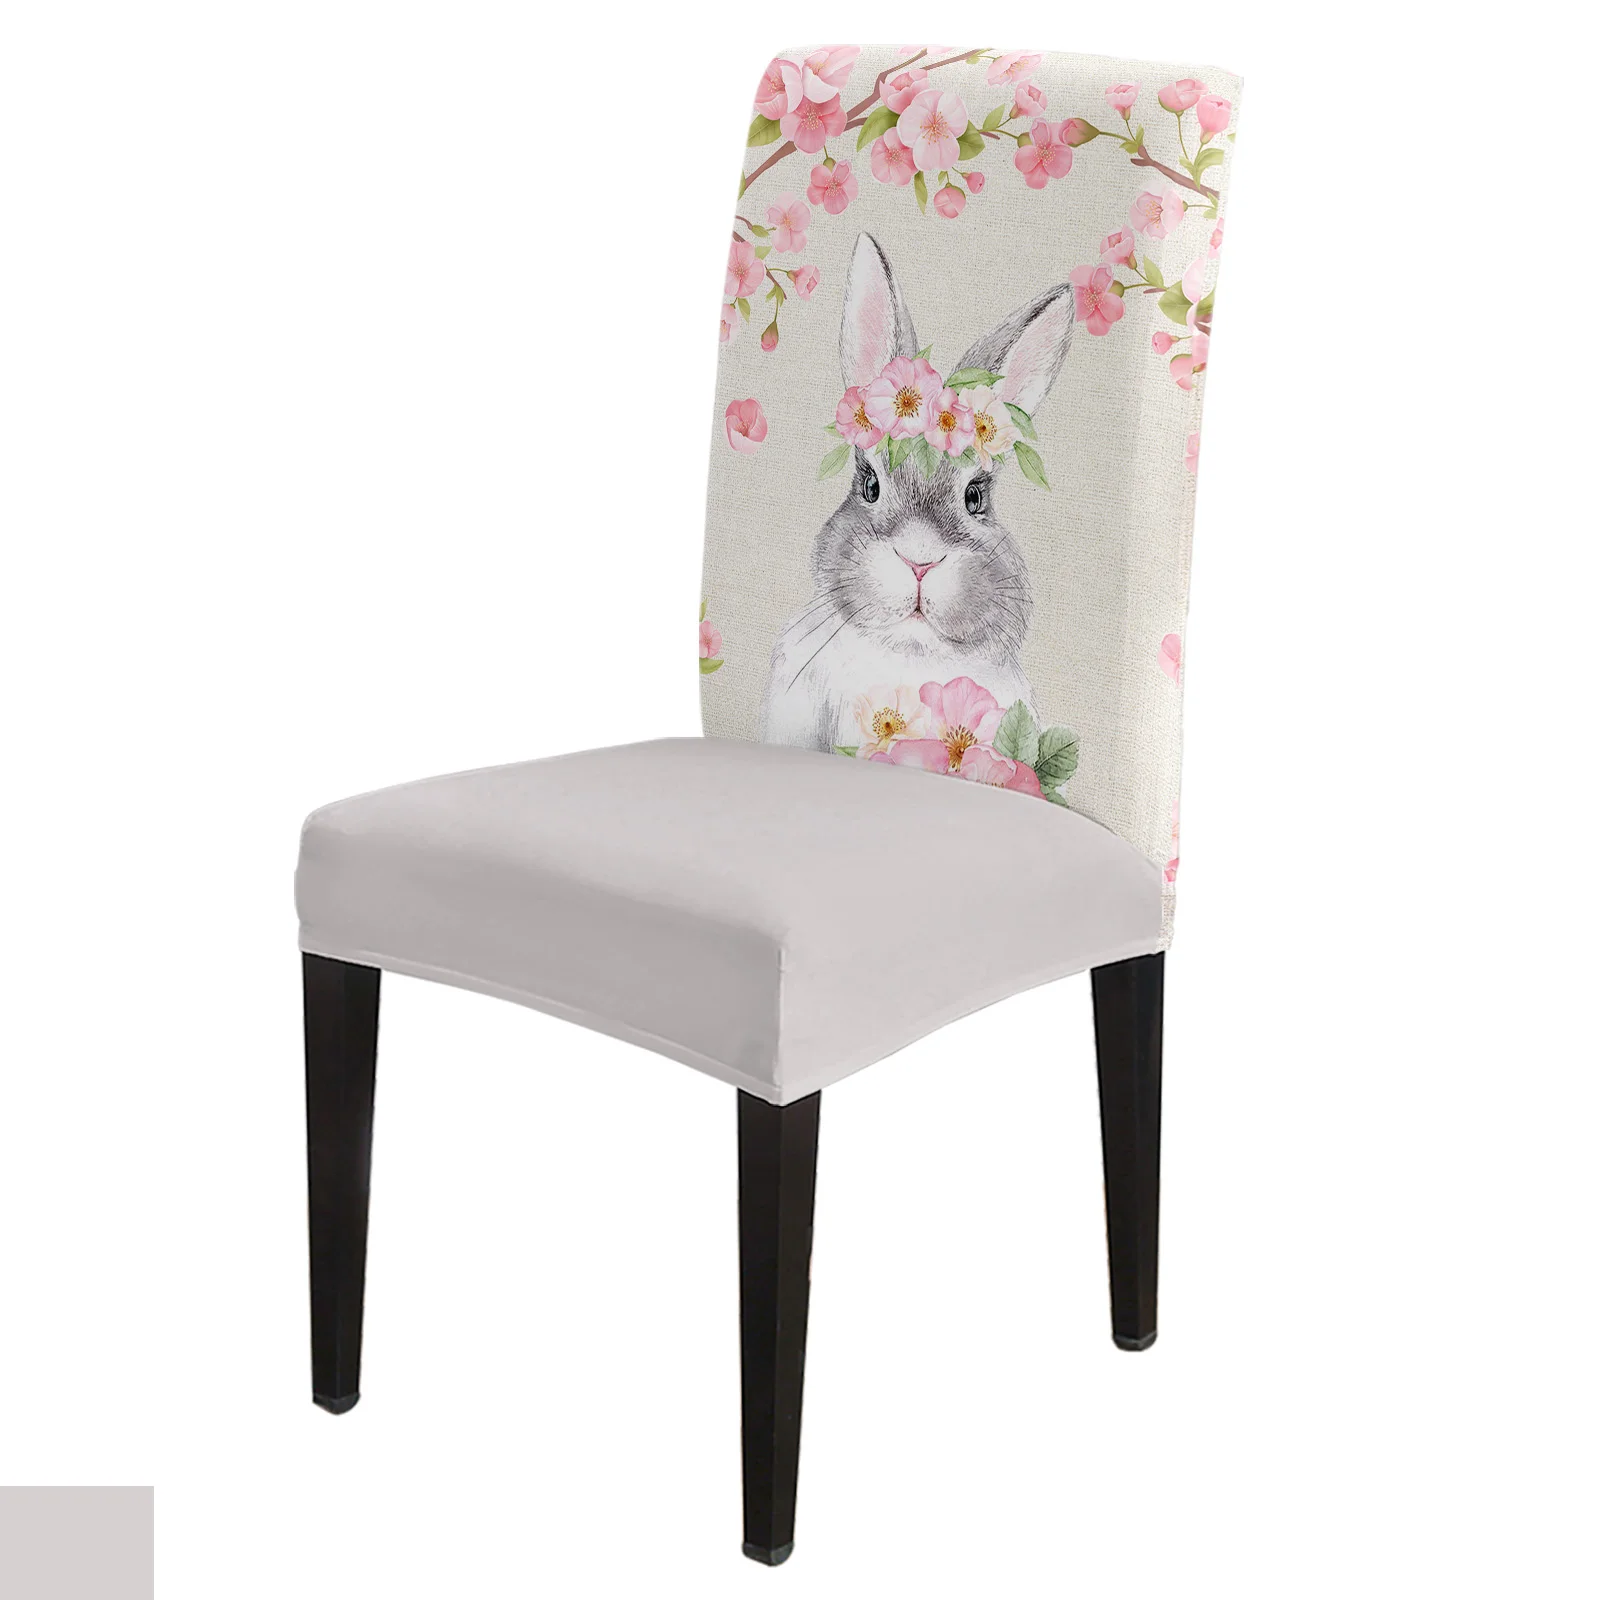 

Easter Rabbit Cherry Blossom Wood Grain Chair Cover Dining Spandex Stretch Seat Covers Home Office Decor Desk Chair Case Set